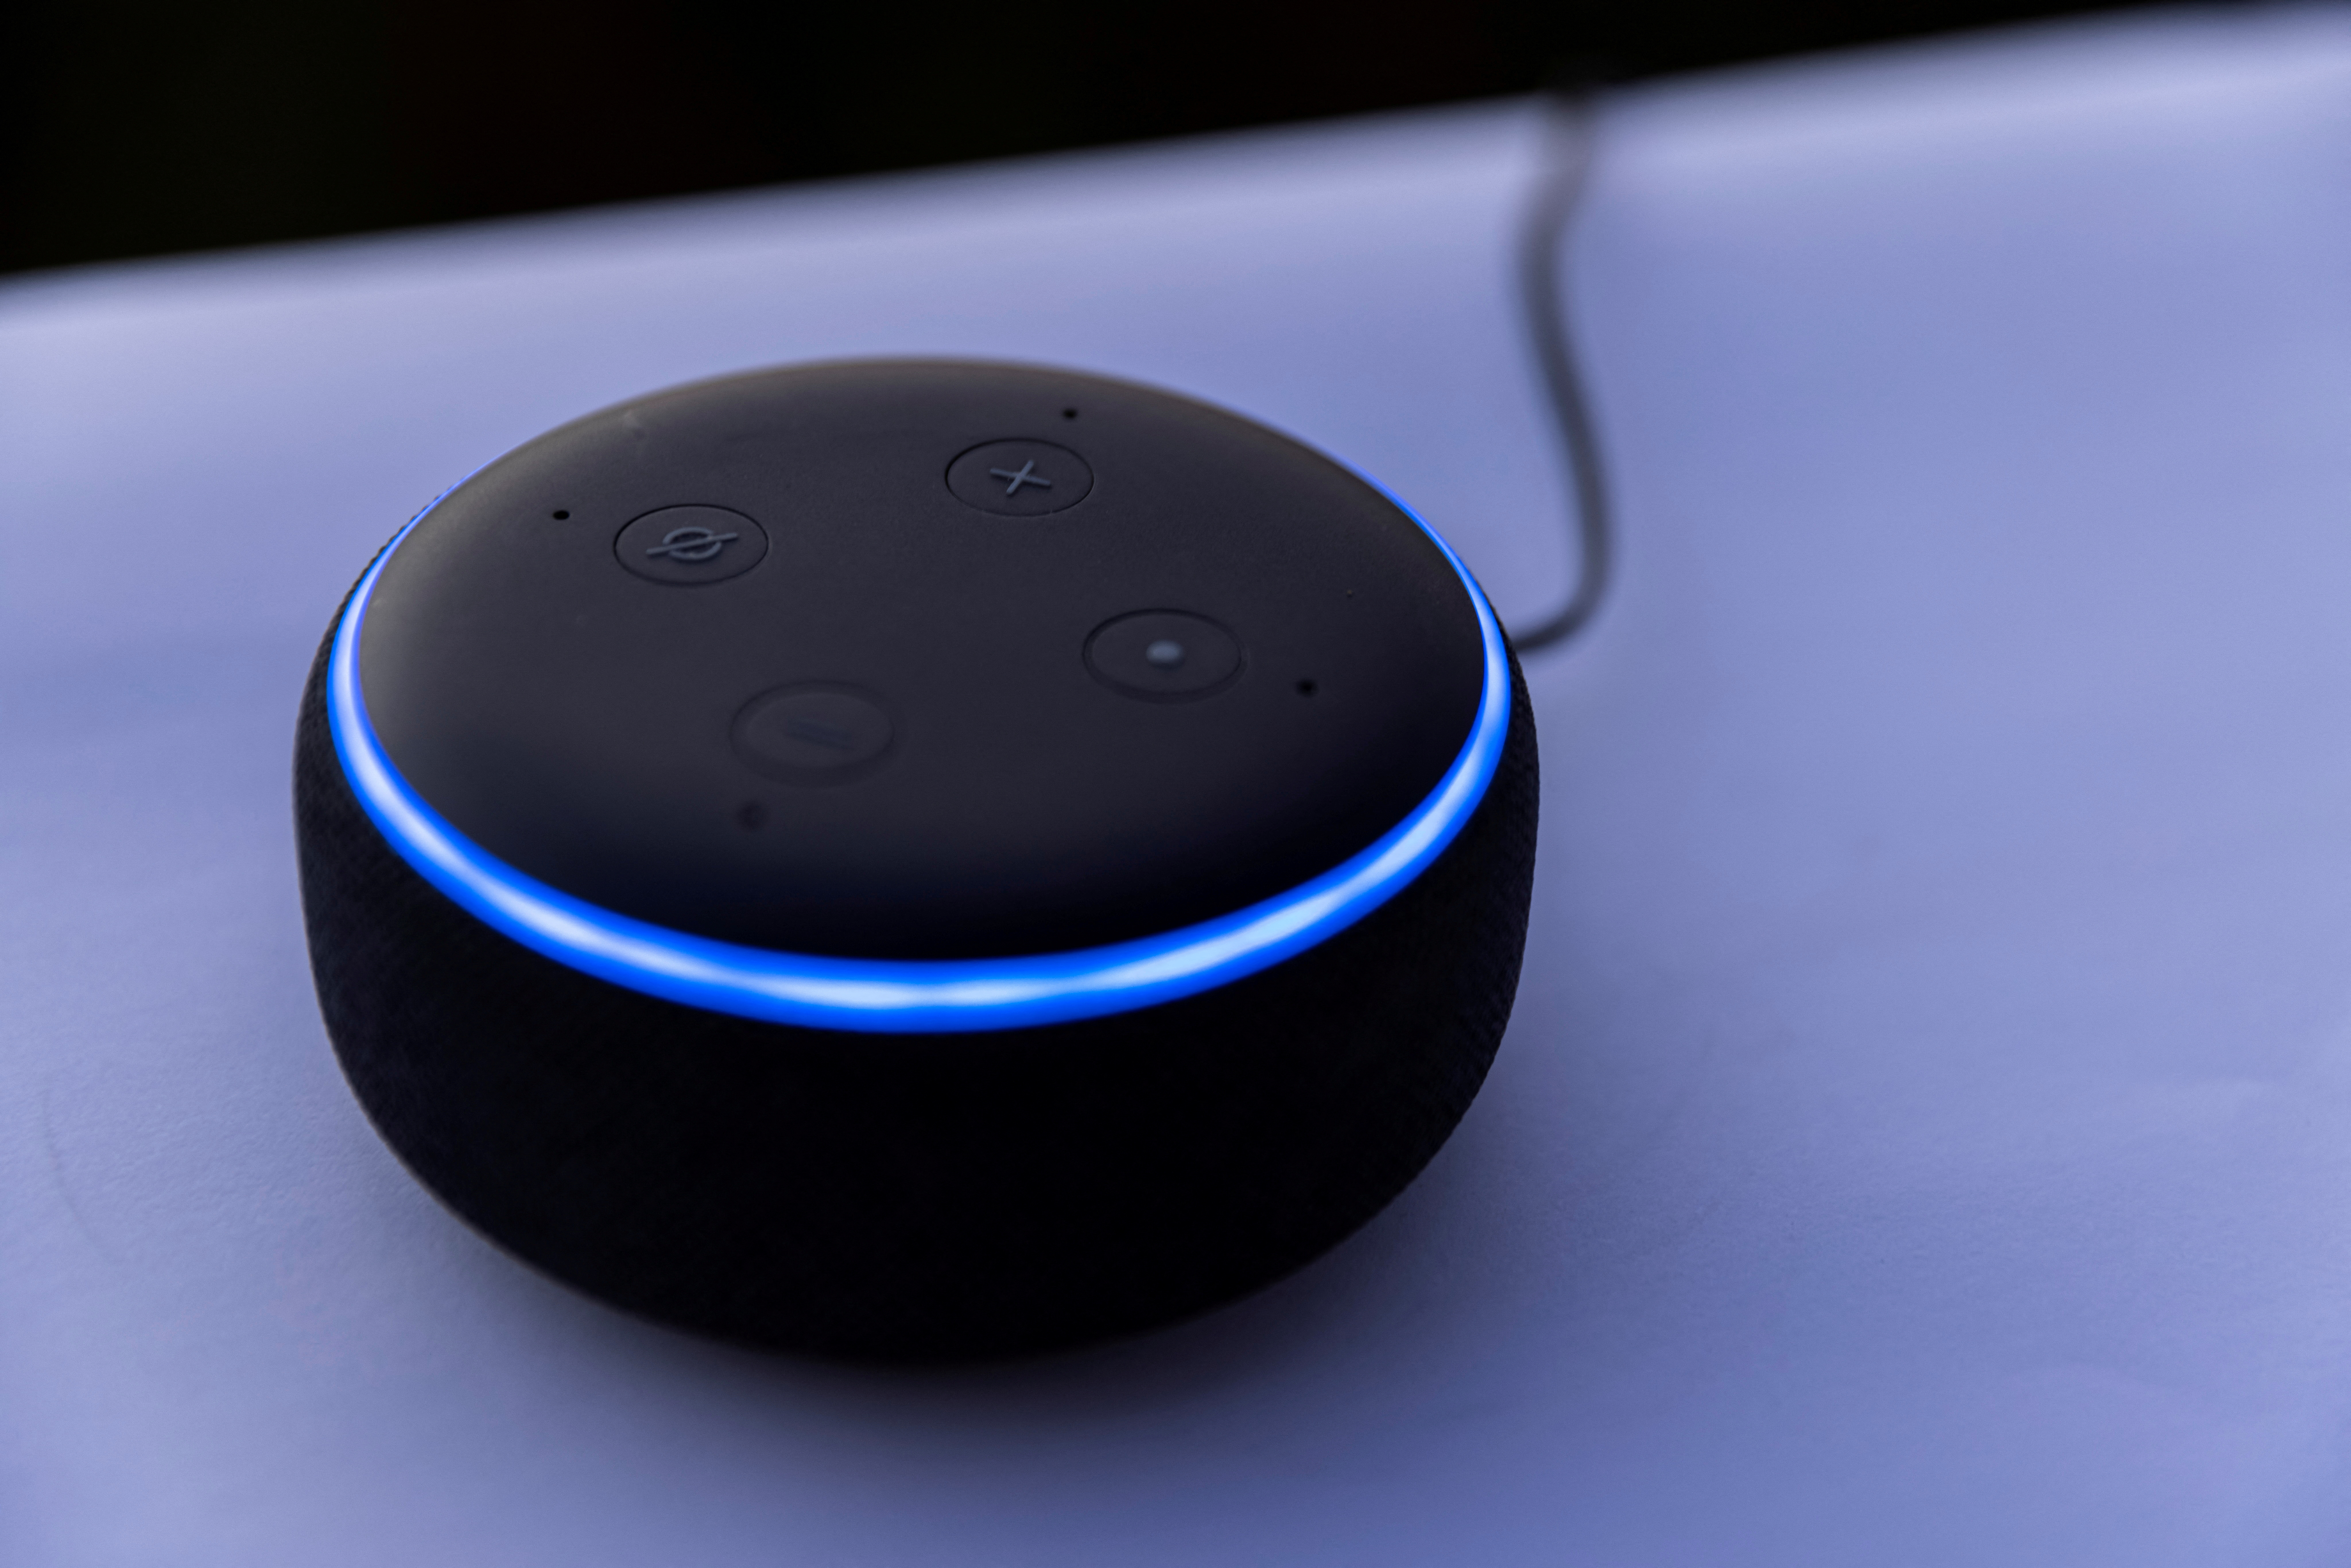 Amazon's DOT Alexa device is shown in this picture illustration